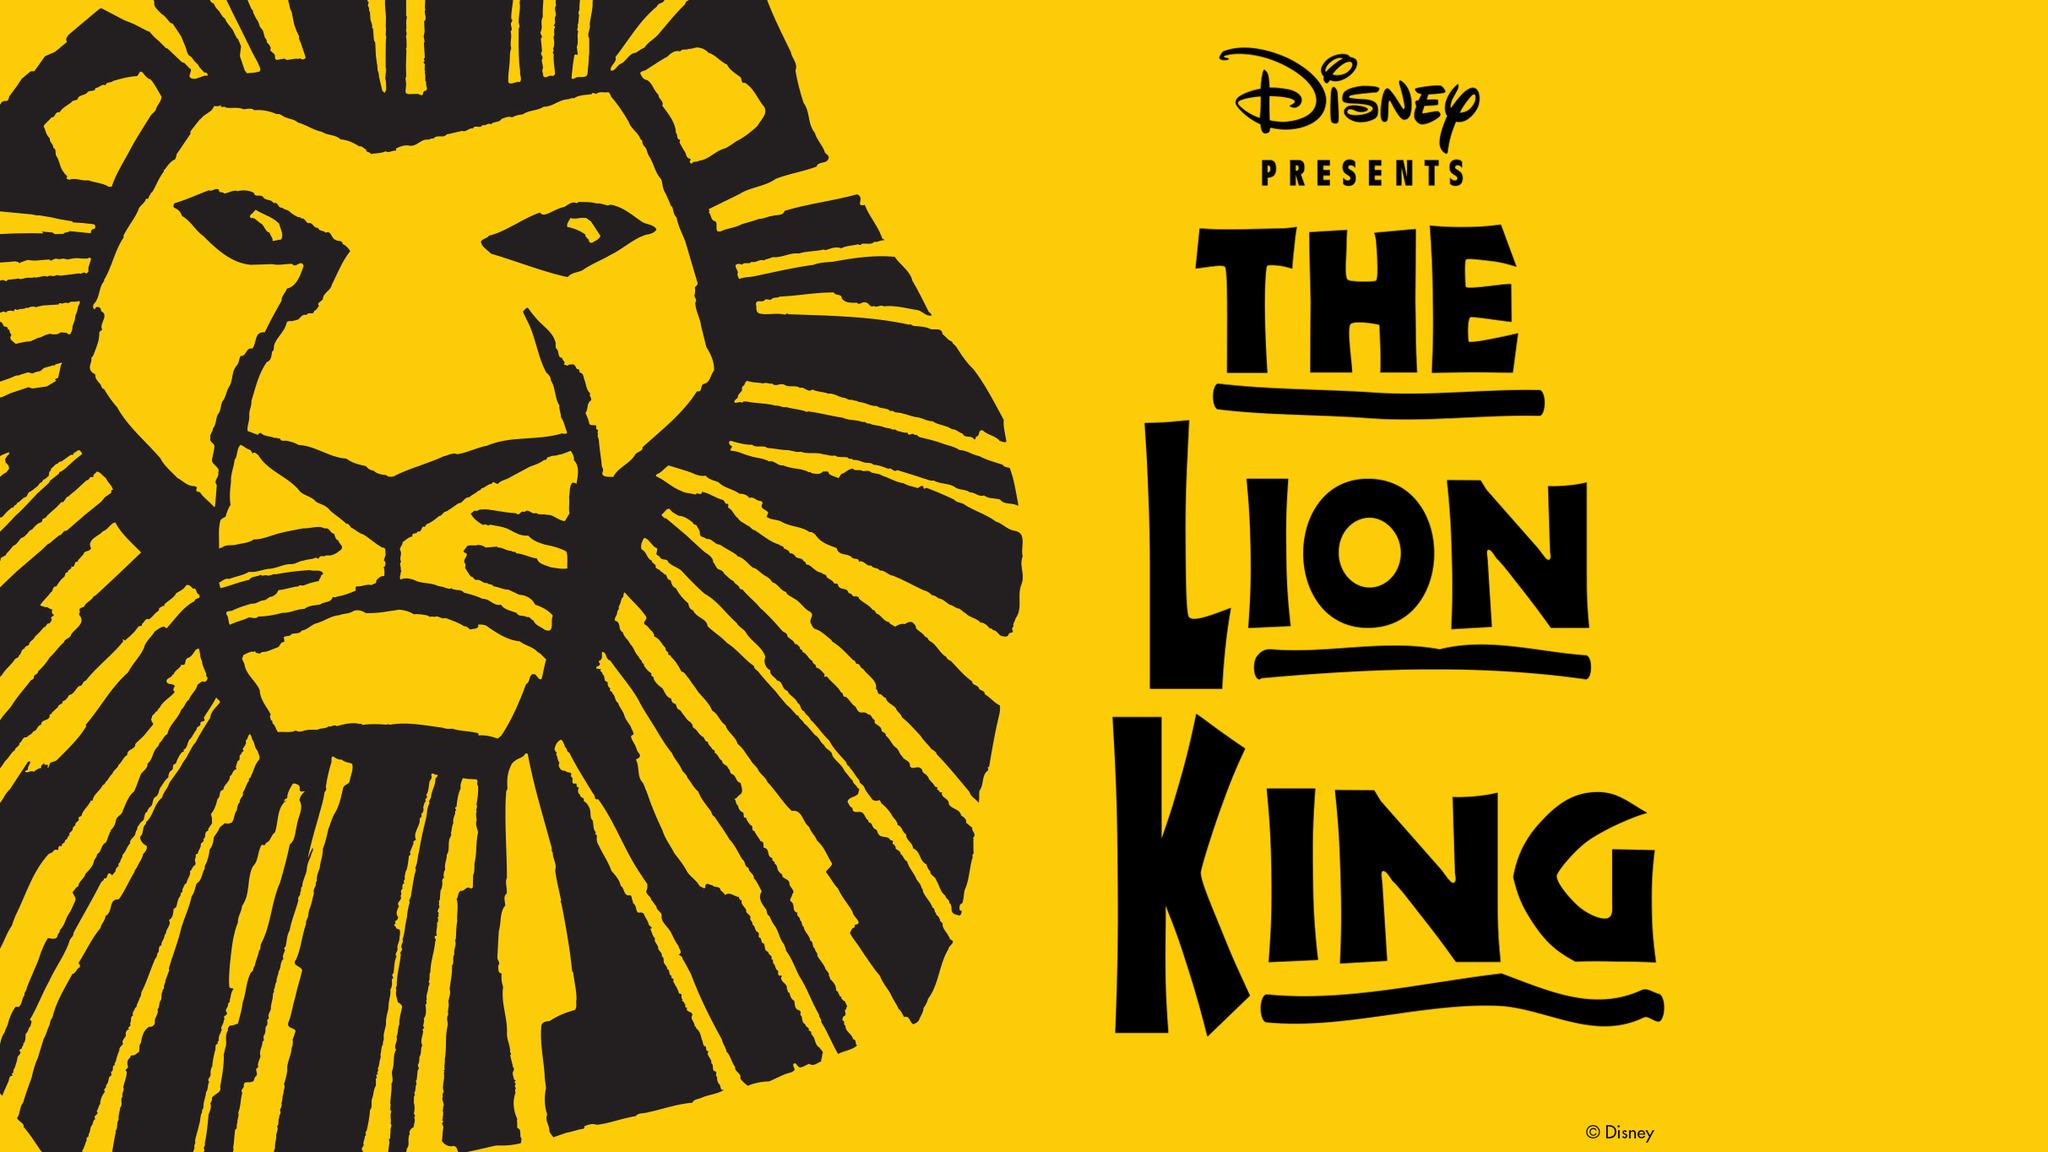 Disney Presents The Lion King (Chicago) Tickets Event Dates